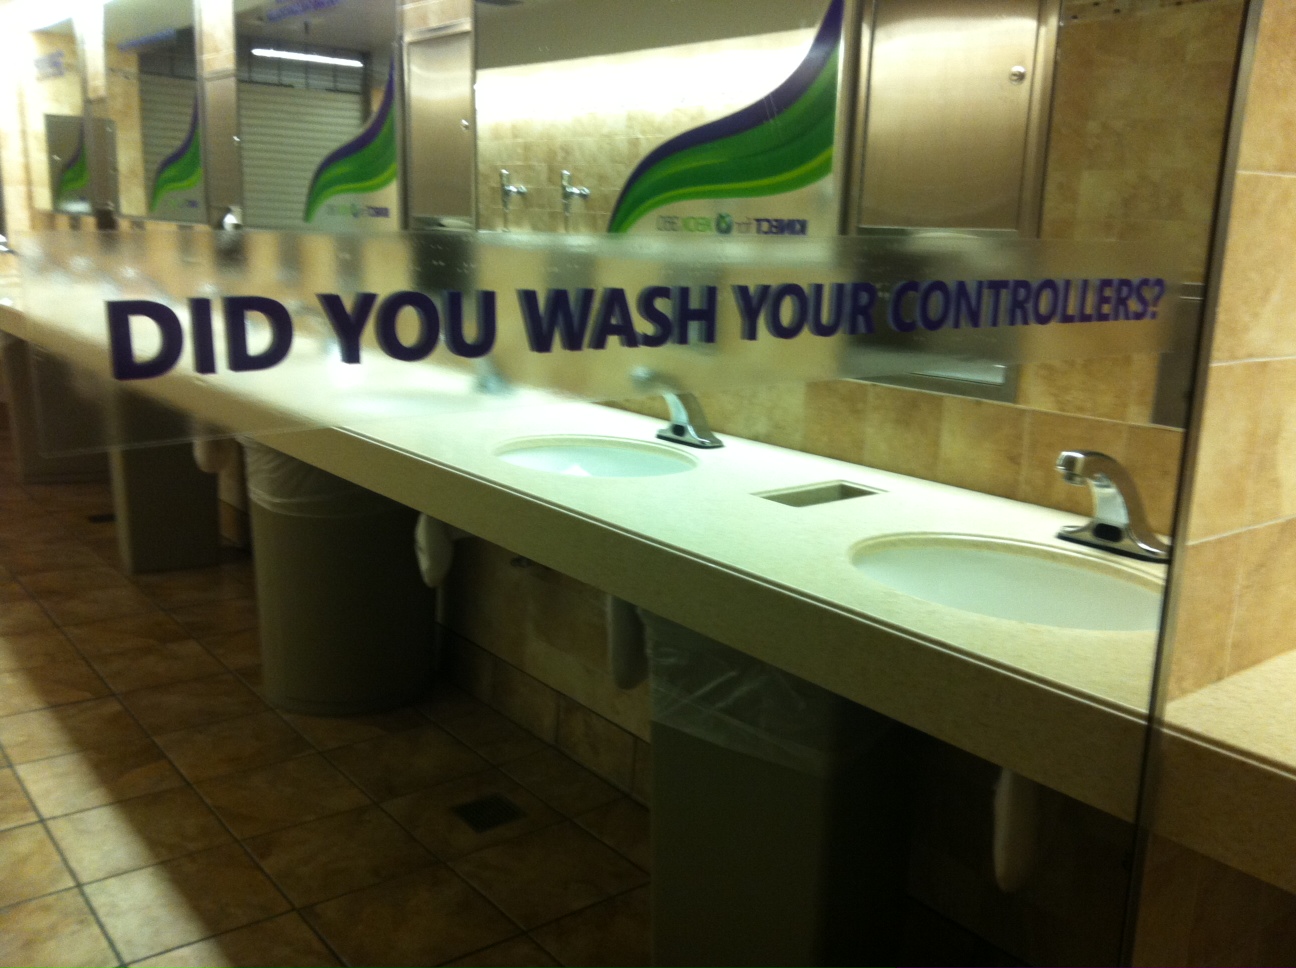 A photo of the hotel bathroom, where Microsoft had put up advertising stickers saying "Did you wash your controllers?"